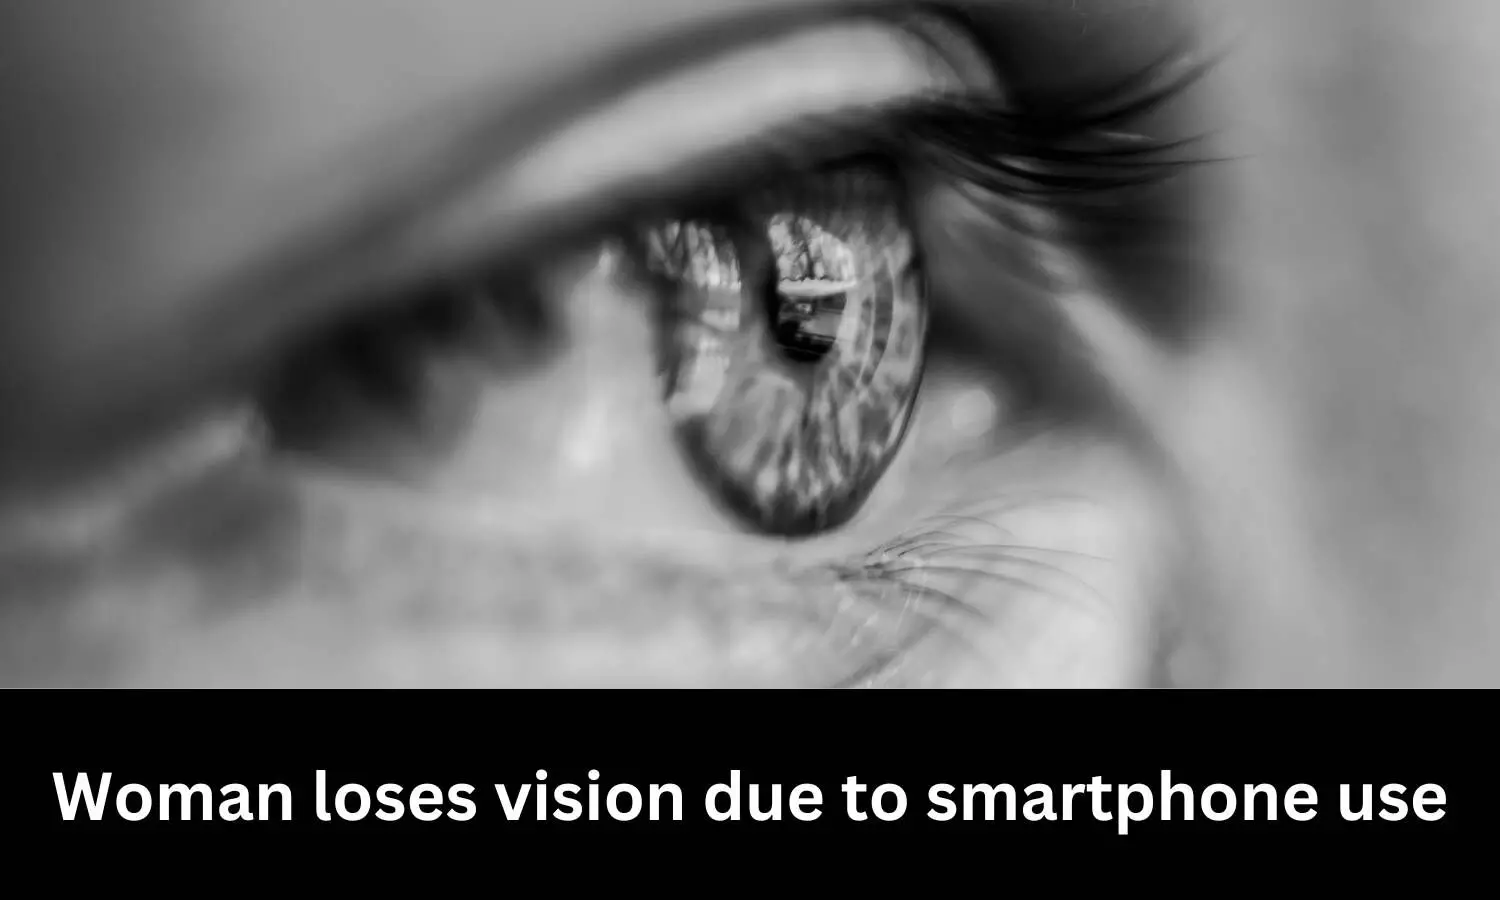 Woman loses vision due to smartphone use